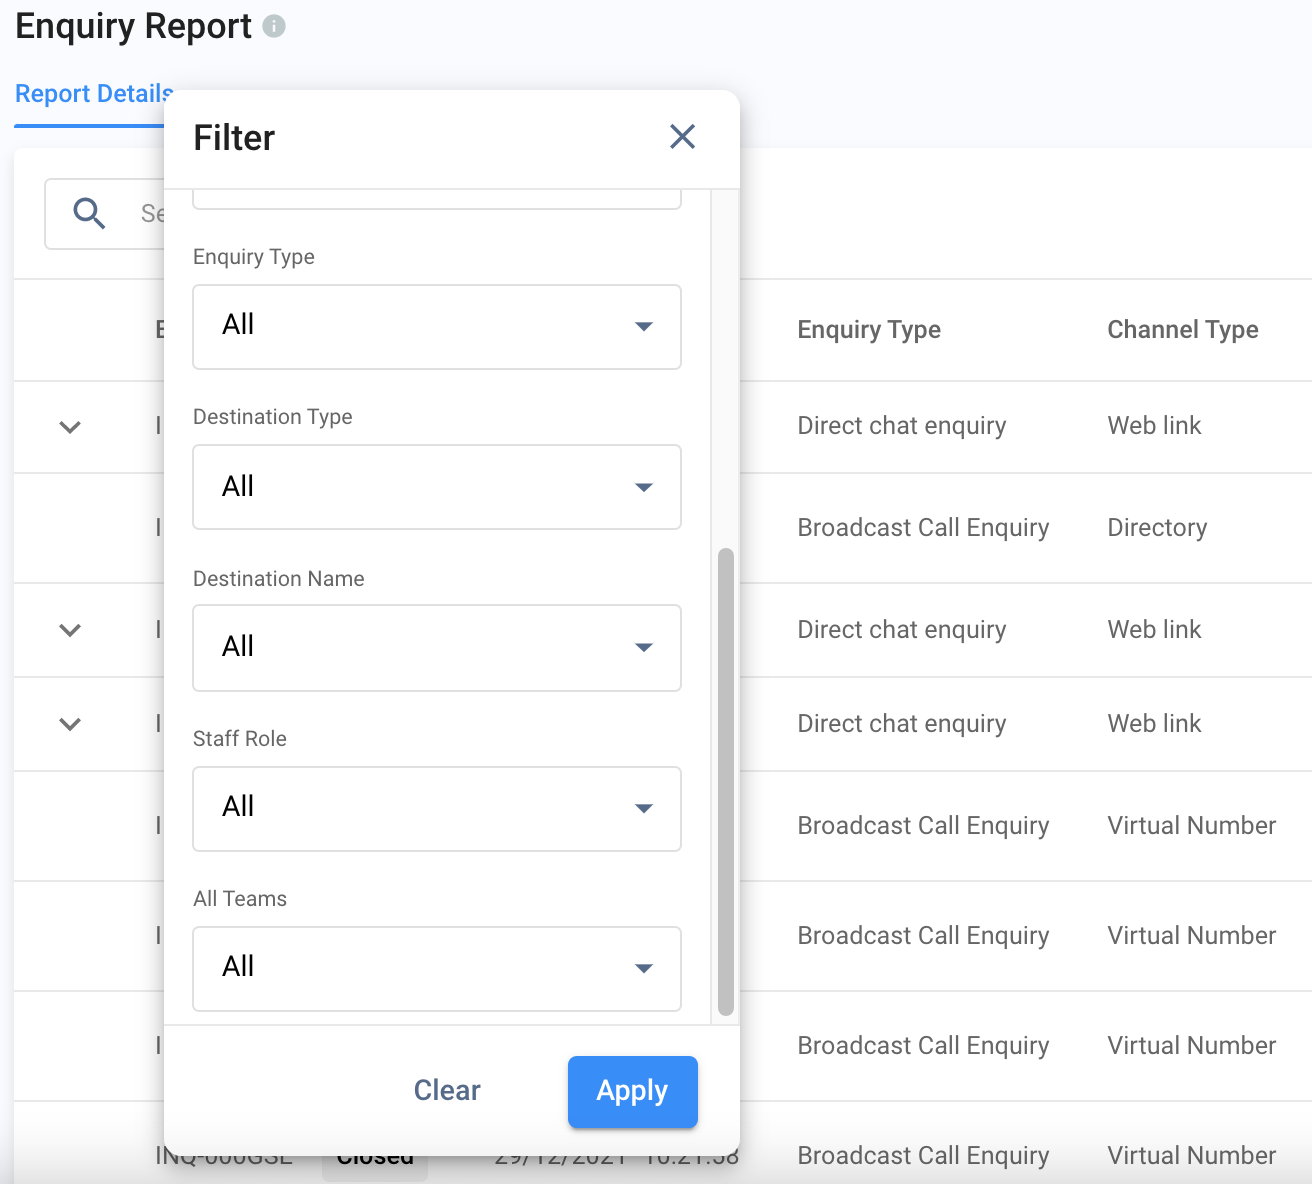 Enquiry Detail Report Filter